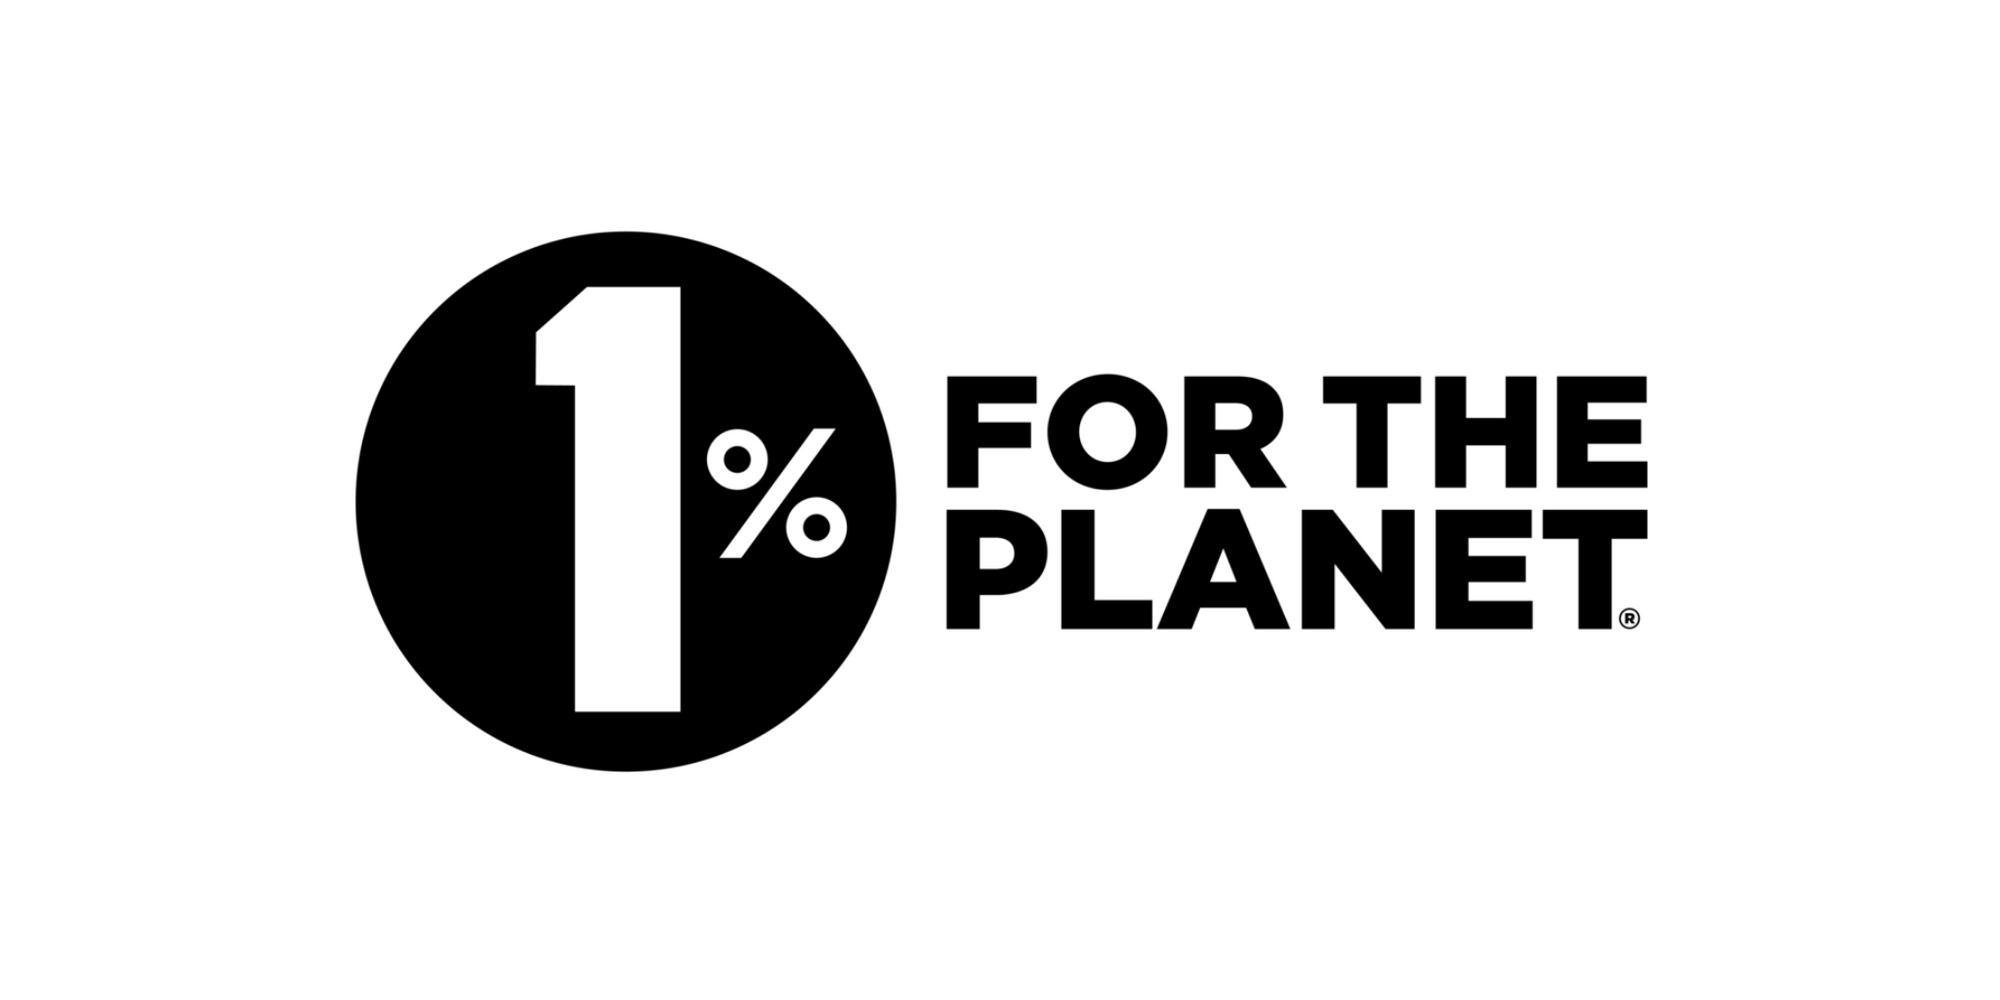 1% for the planet